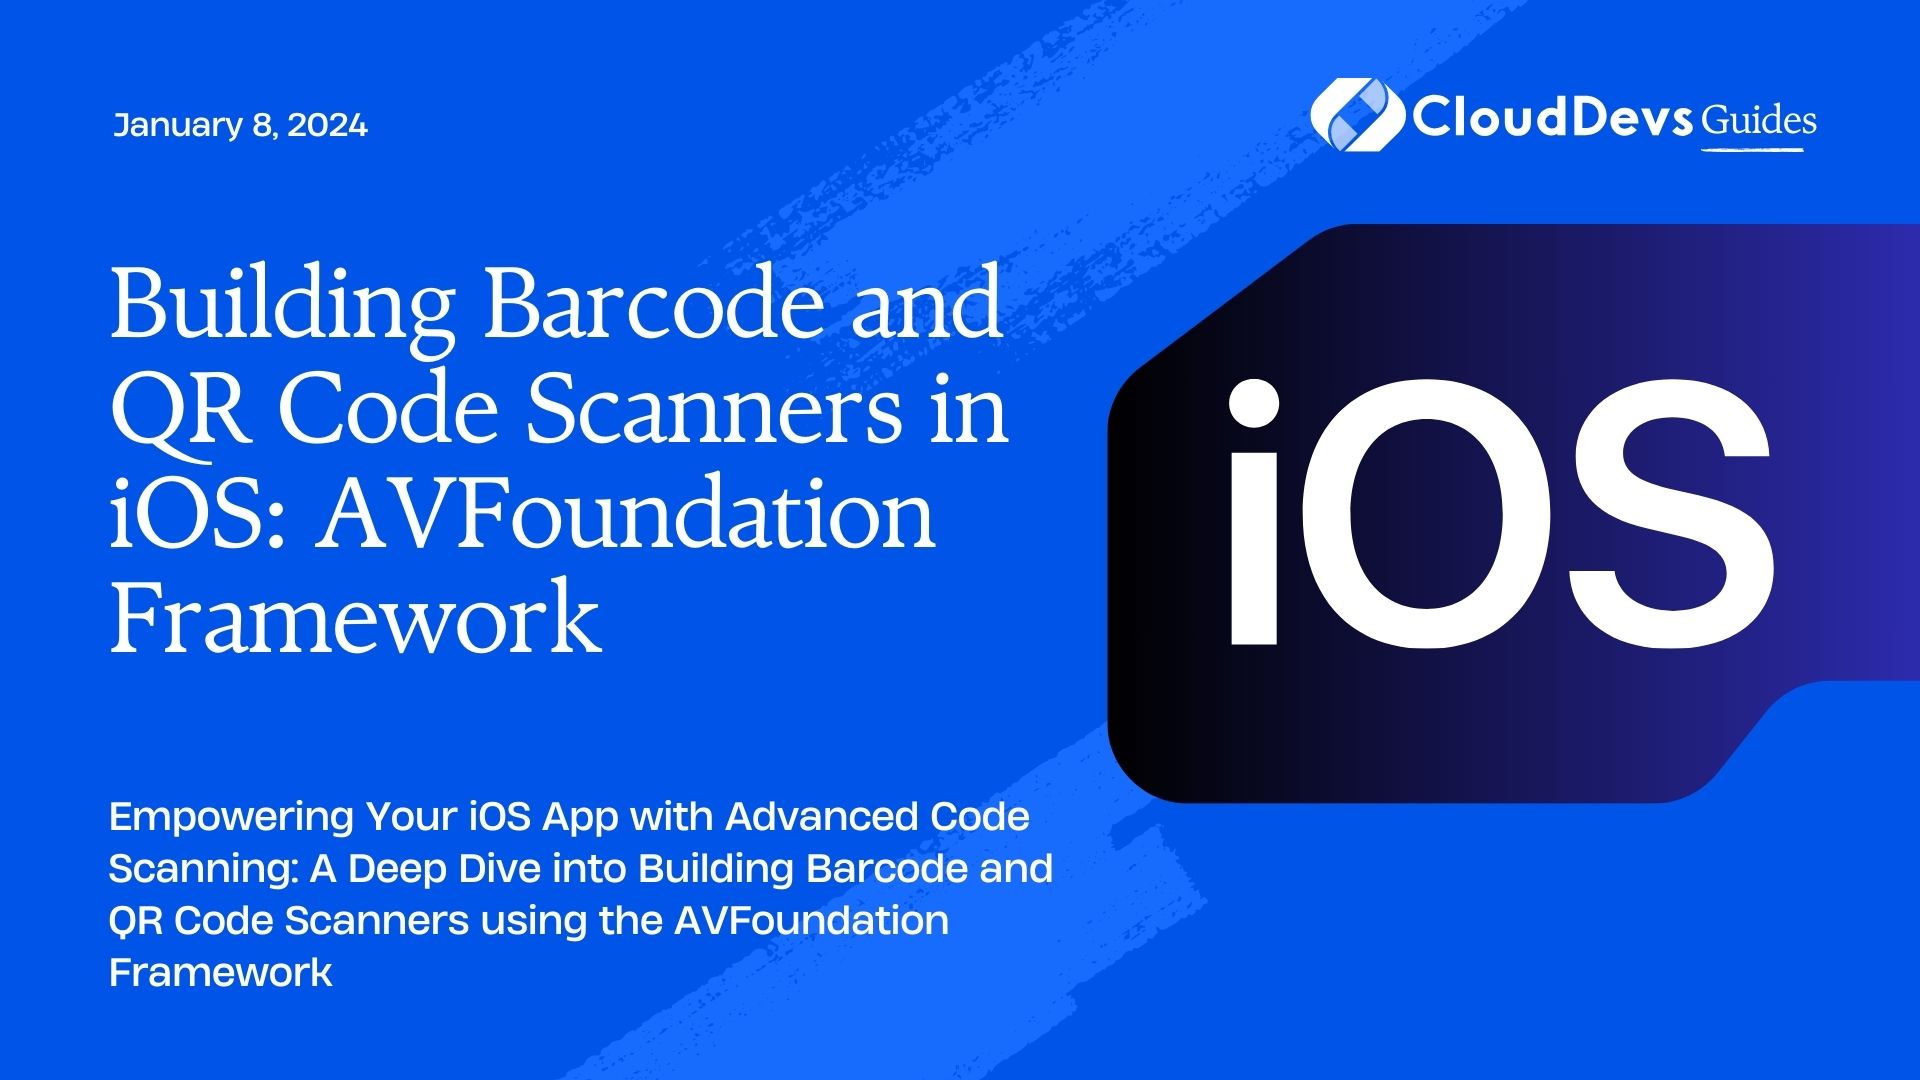 Building Barcode and QR Code Scanners in iOS: AVFoundation Framework